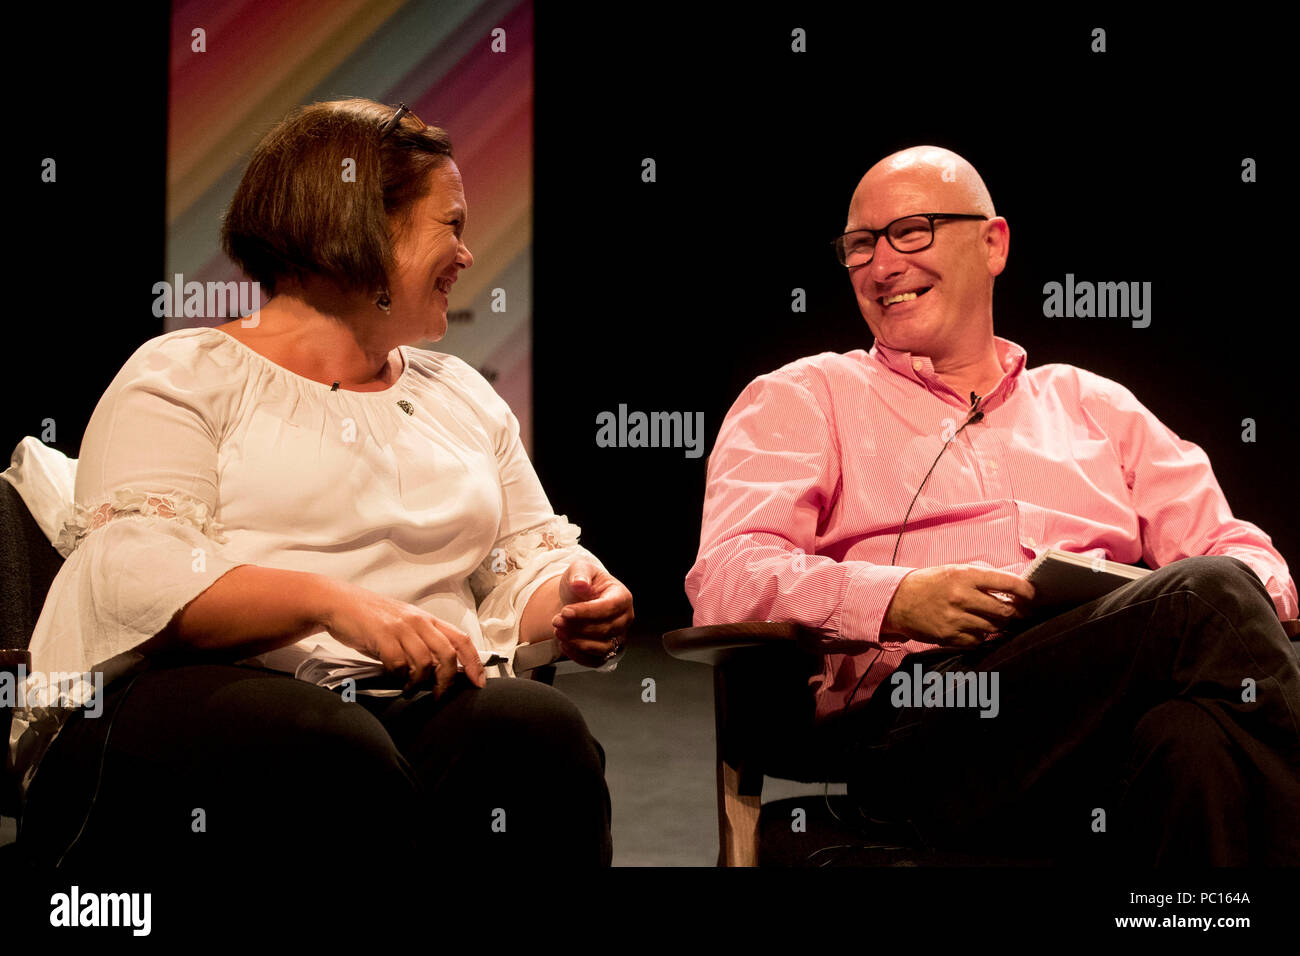 Sinn Fein President Mary Lou McDonald and leader of the PUP Billy Hutchinson share a moment during the Belfast Pride political debate at The Mac Theatre in Belfast to address a wide range of equality issues in Northern Ireland at part of the 2018 Belfast Pride Festival. Stock Photo